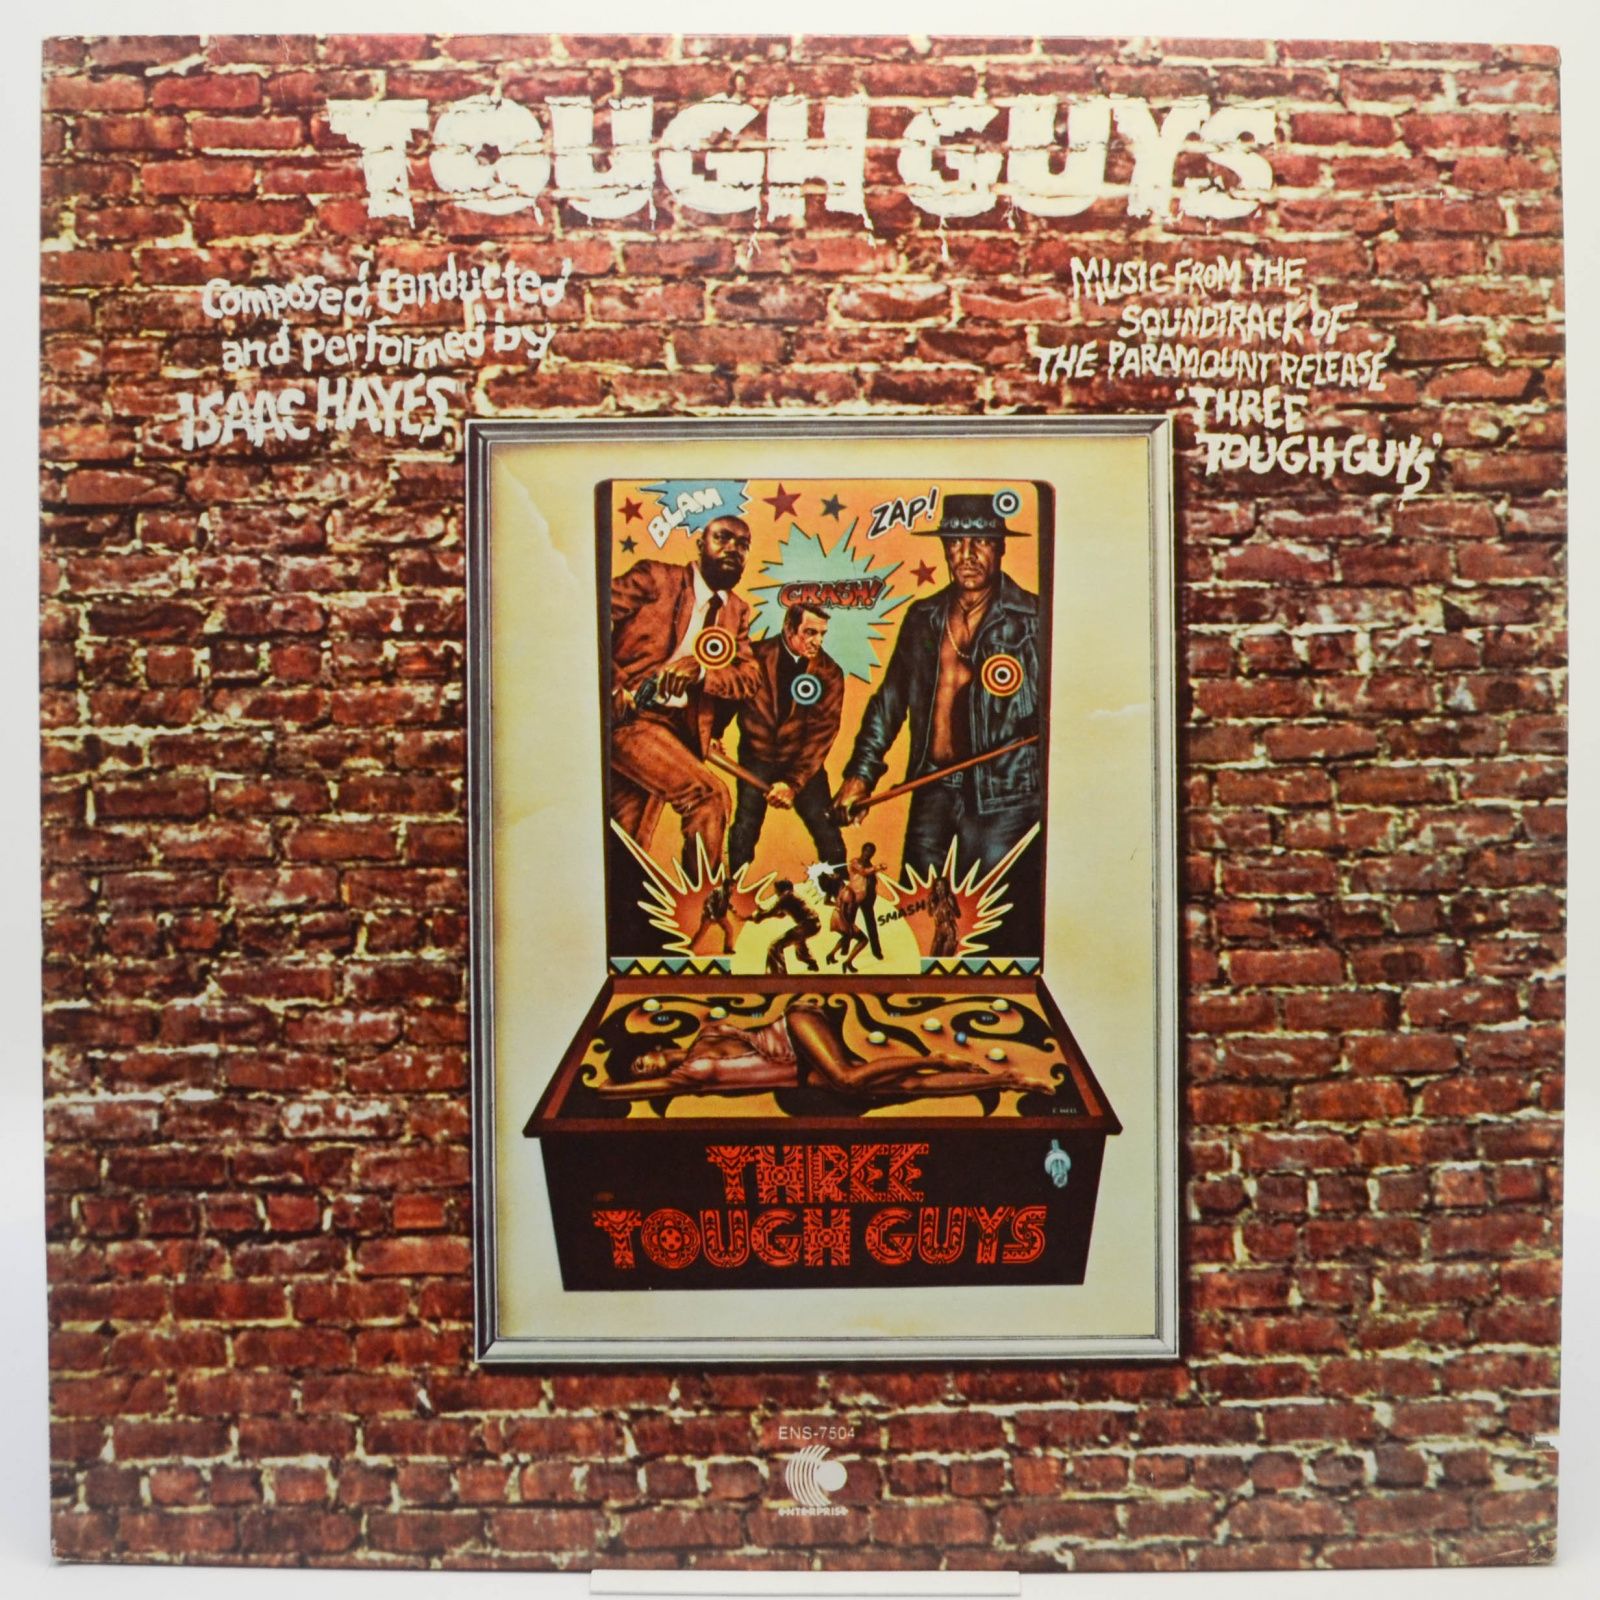 Tough Guys (Music From The Soundtrack Of The Paramount Release 'Three Tough Guys') (USA), 1974